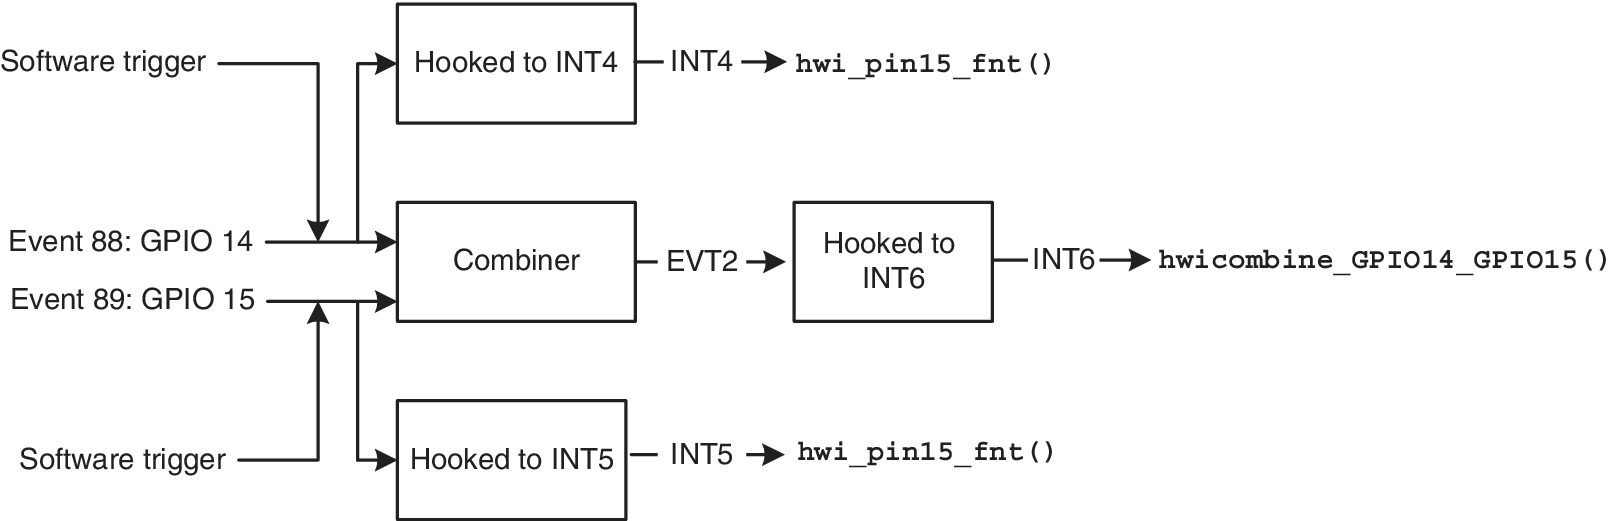 Diagram displaying arrows from software trigger to event 88: GPIO 14 and 15 pointing to boxes labeled Hooked to INT4, Combiner, and Hooked to INT5, leading to hwi_pin15_fnt() and hwicombine_GPIO14_GPIO15().